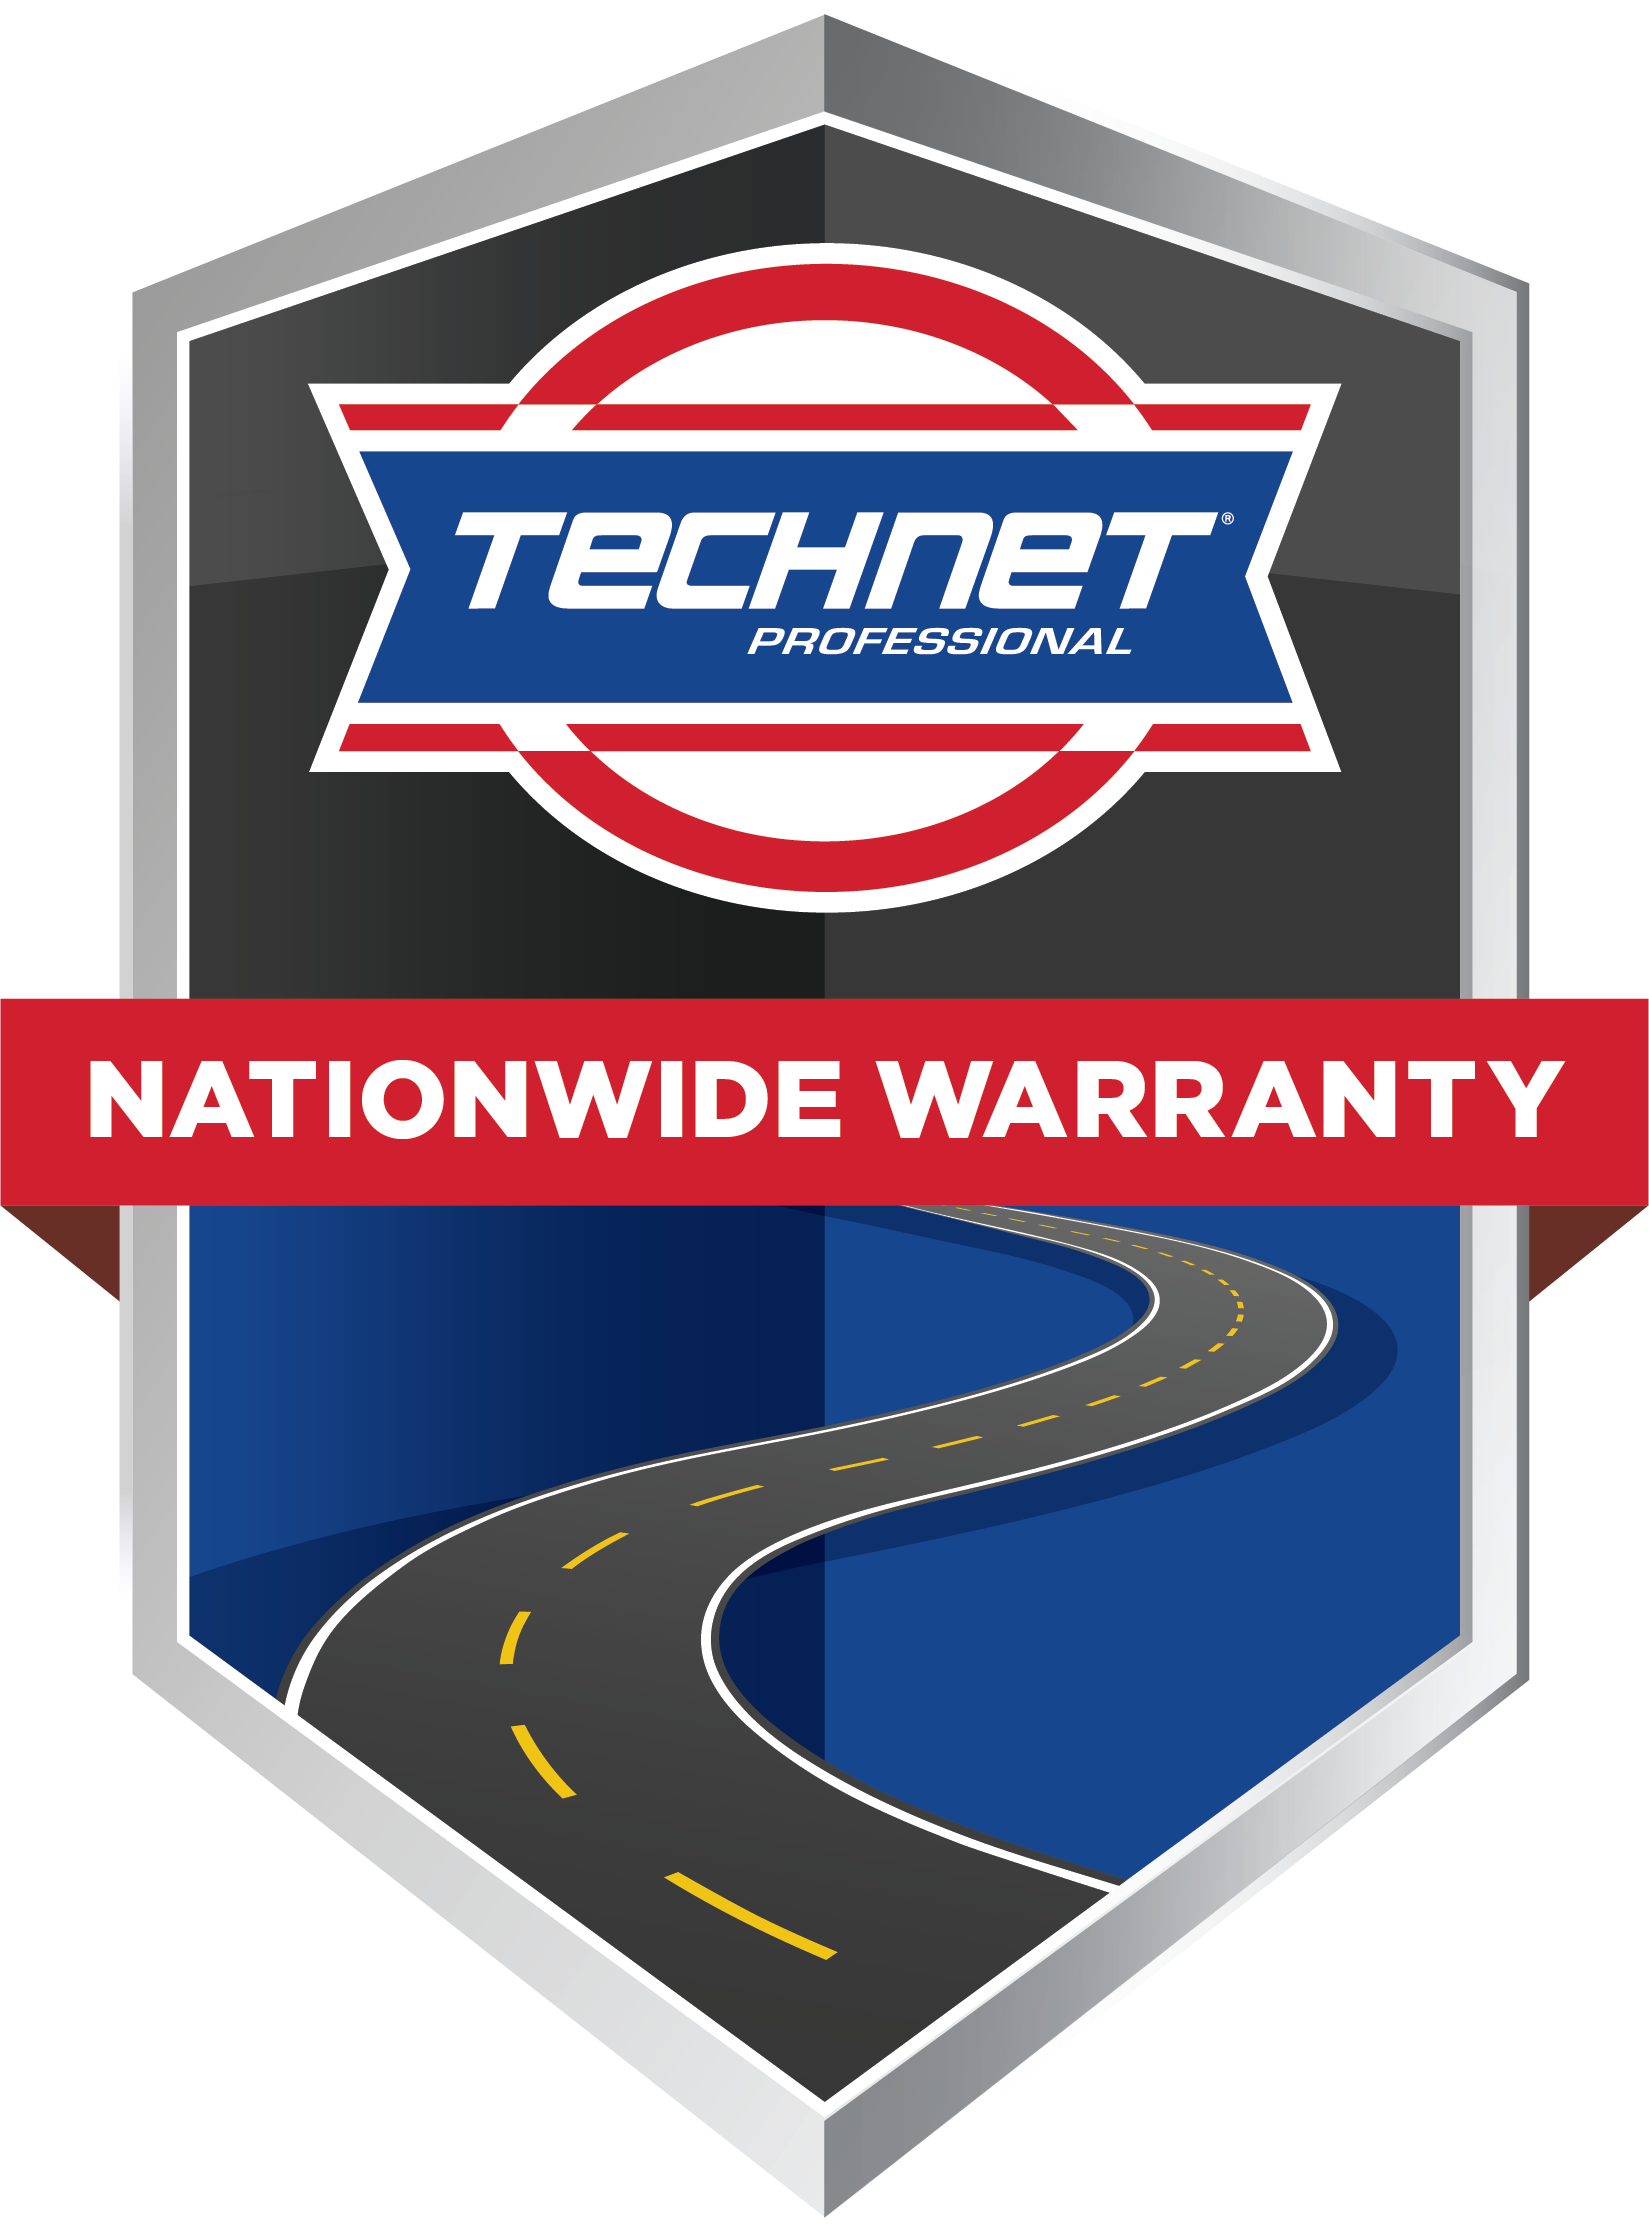 Tenchnet Nationwide Warranty | Forthright Auto Repair